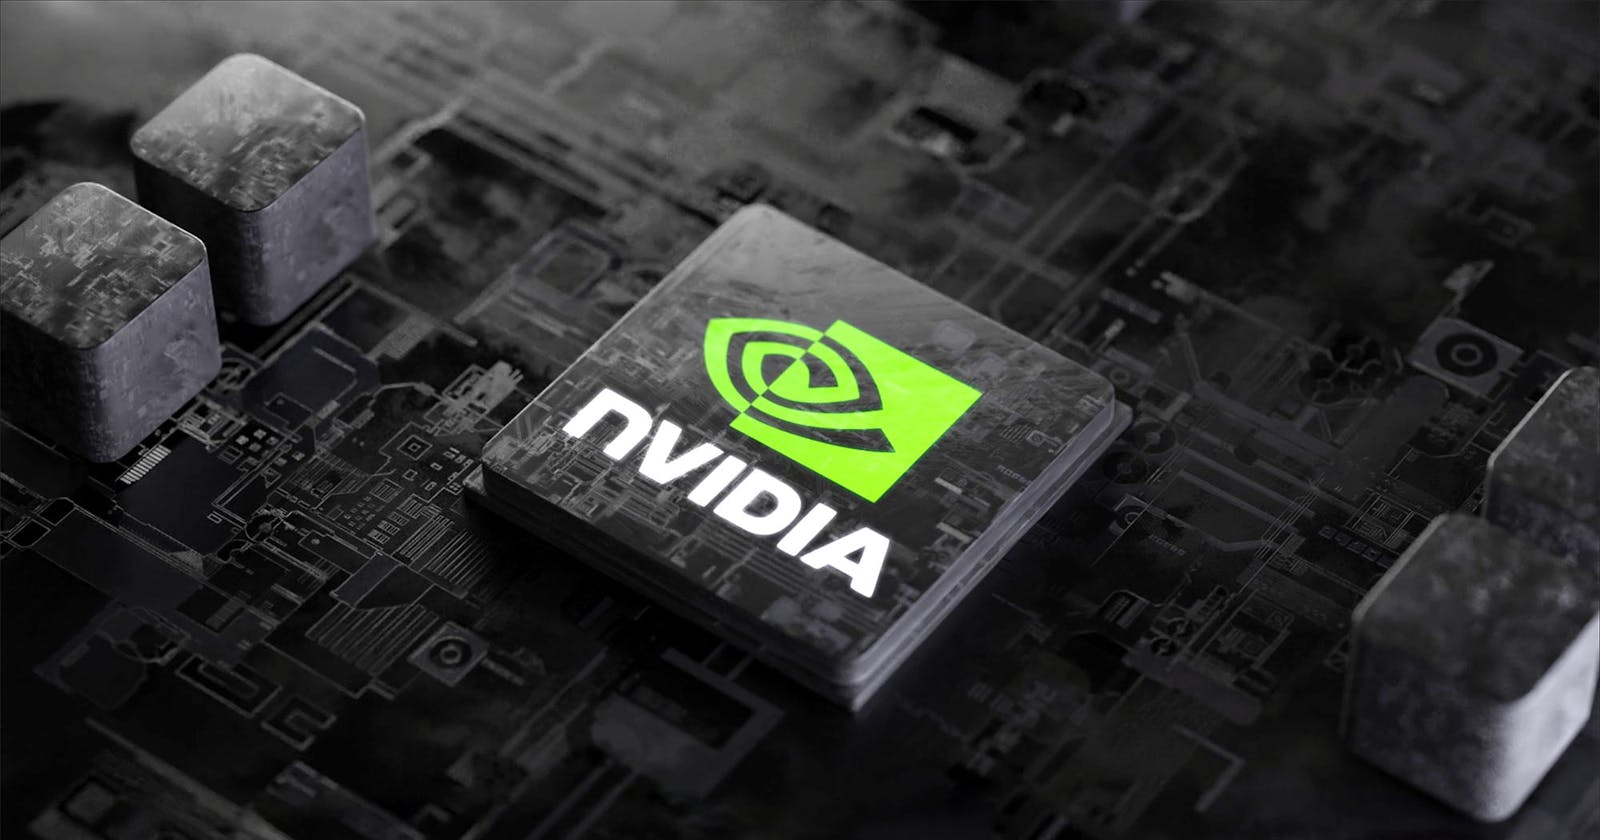 Nvidia: From Gaming Giant to AI Powerhouse